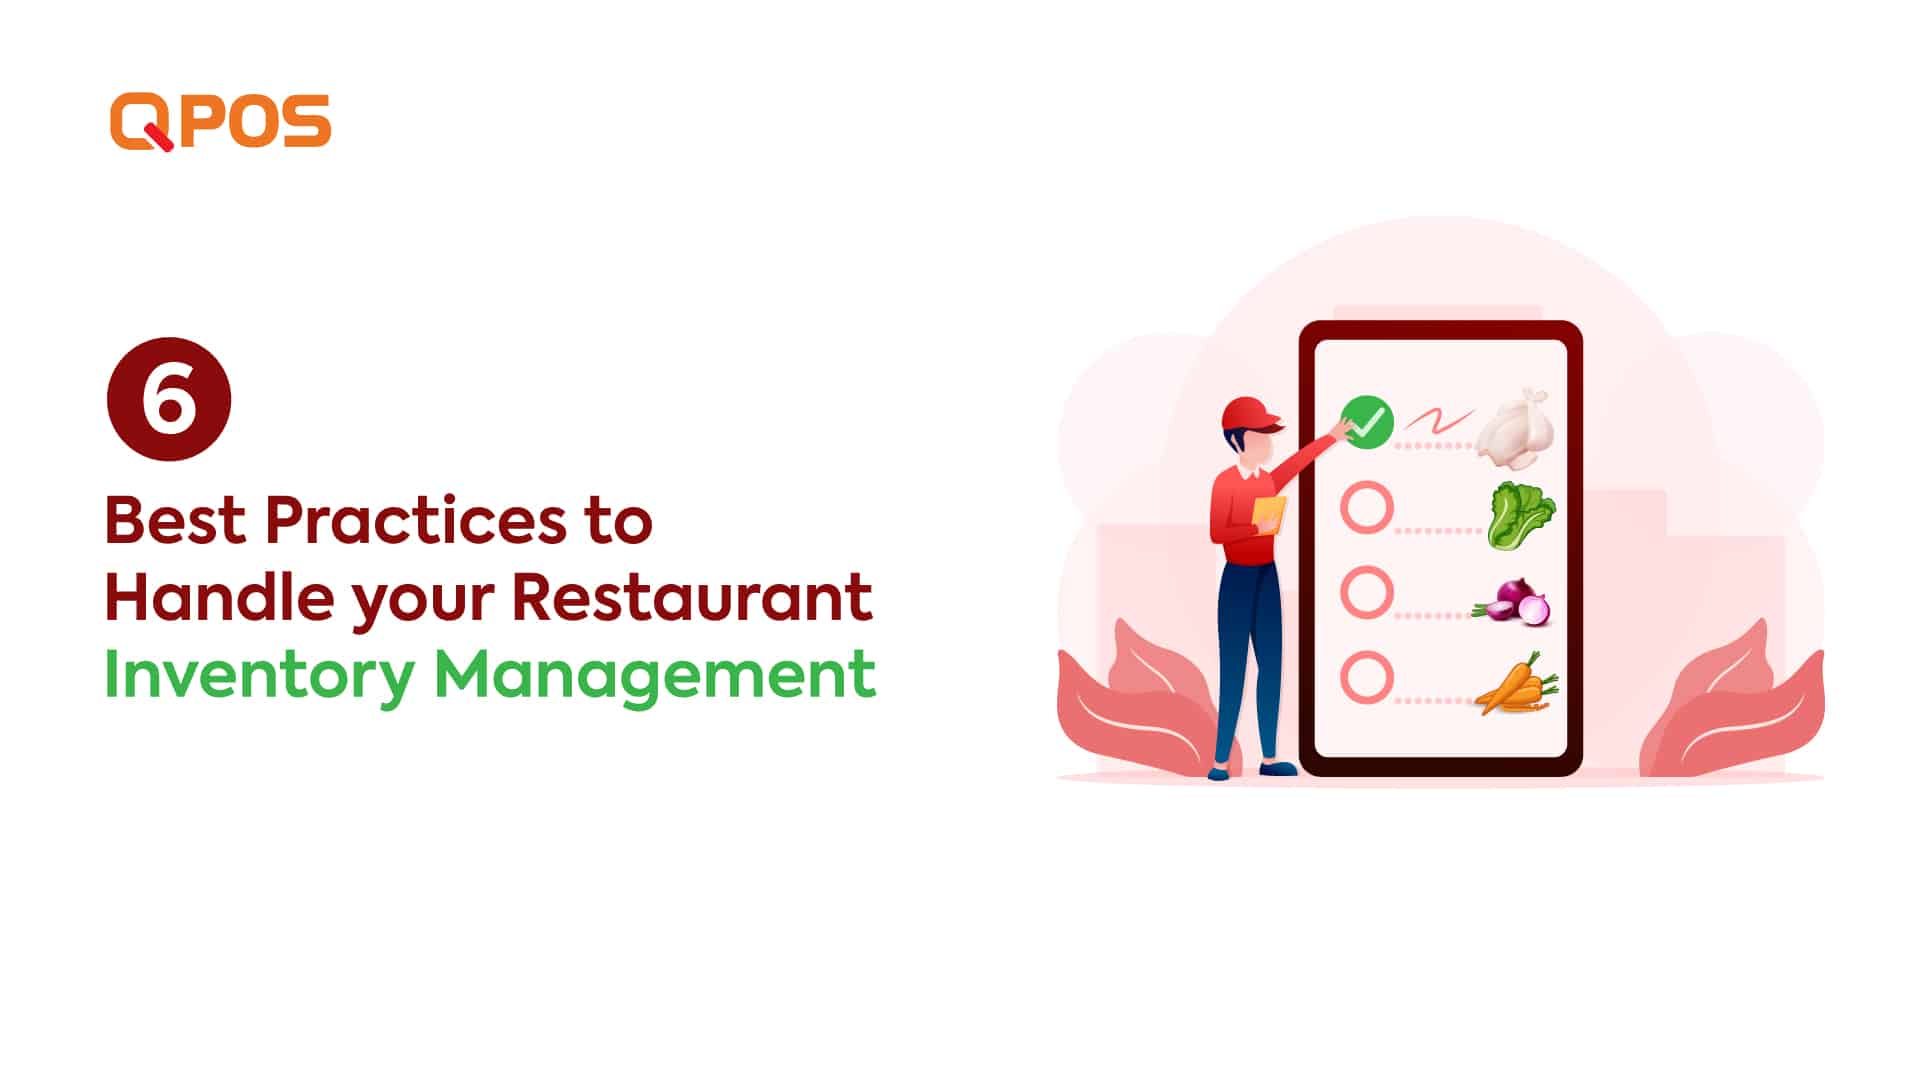 6 Best Practices to handle your Restaurant Inventory Management